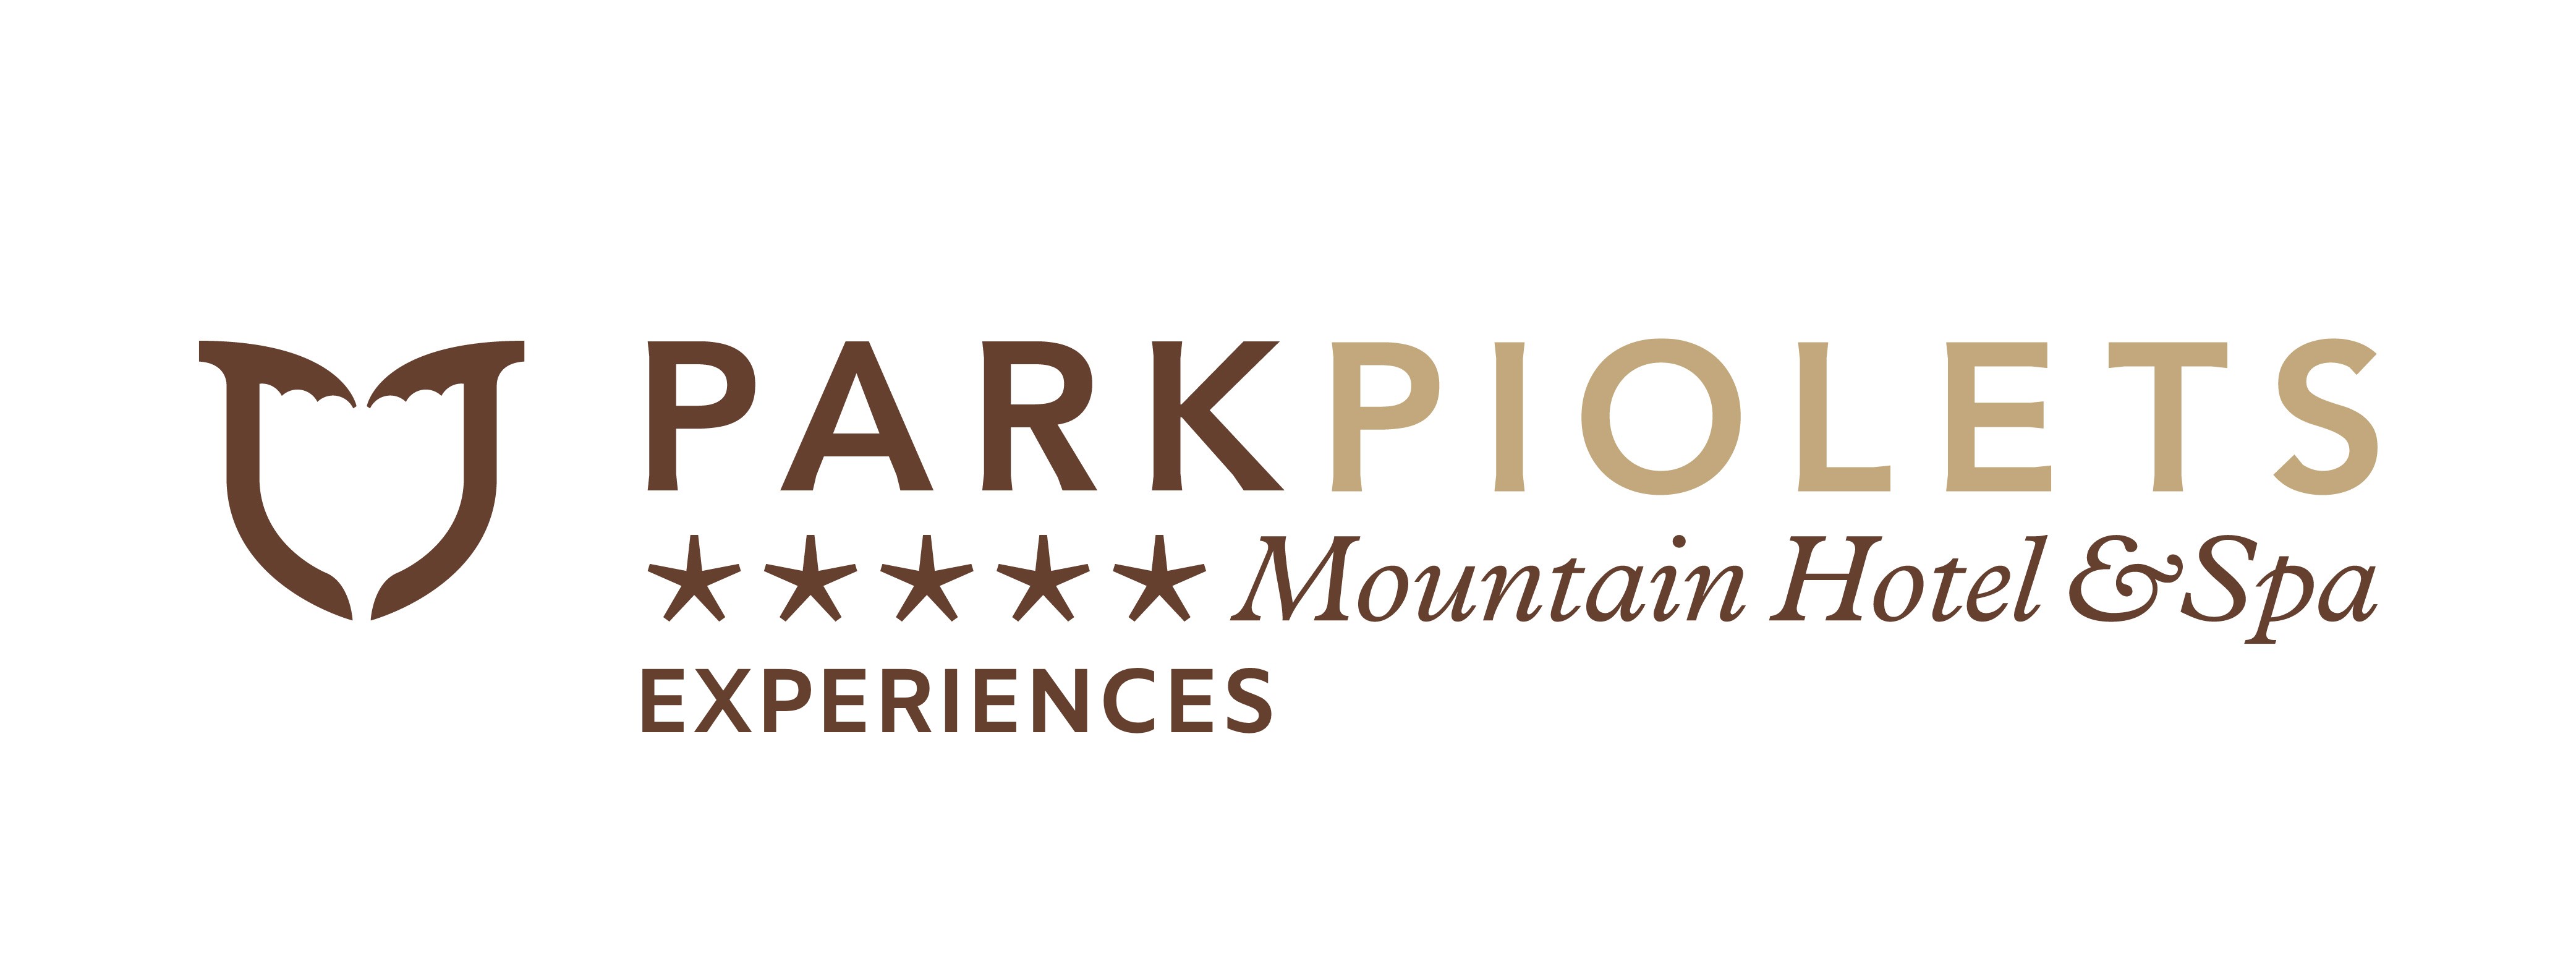 HOTEL PARK PIOLETS Mountain Hotel & Spa